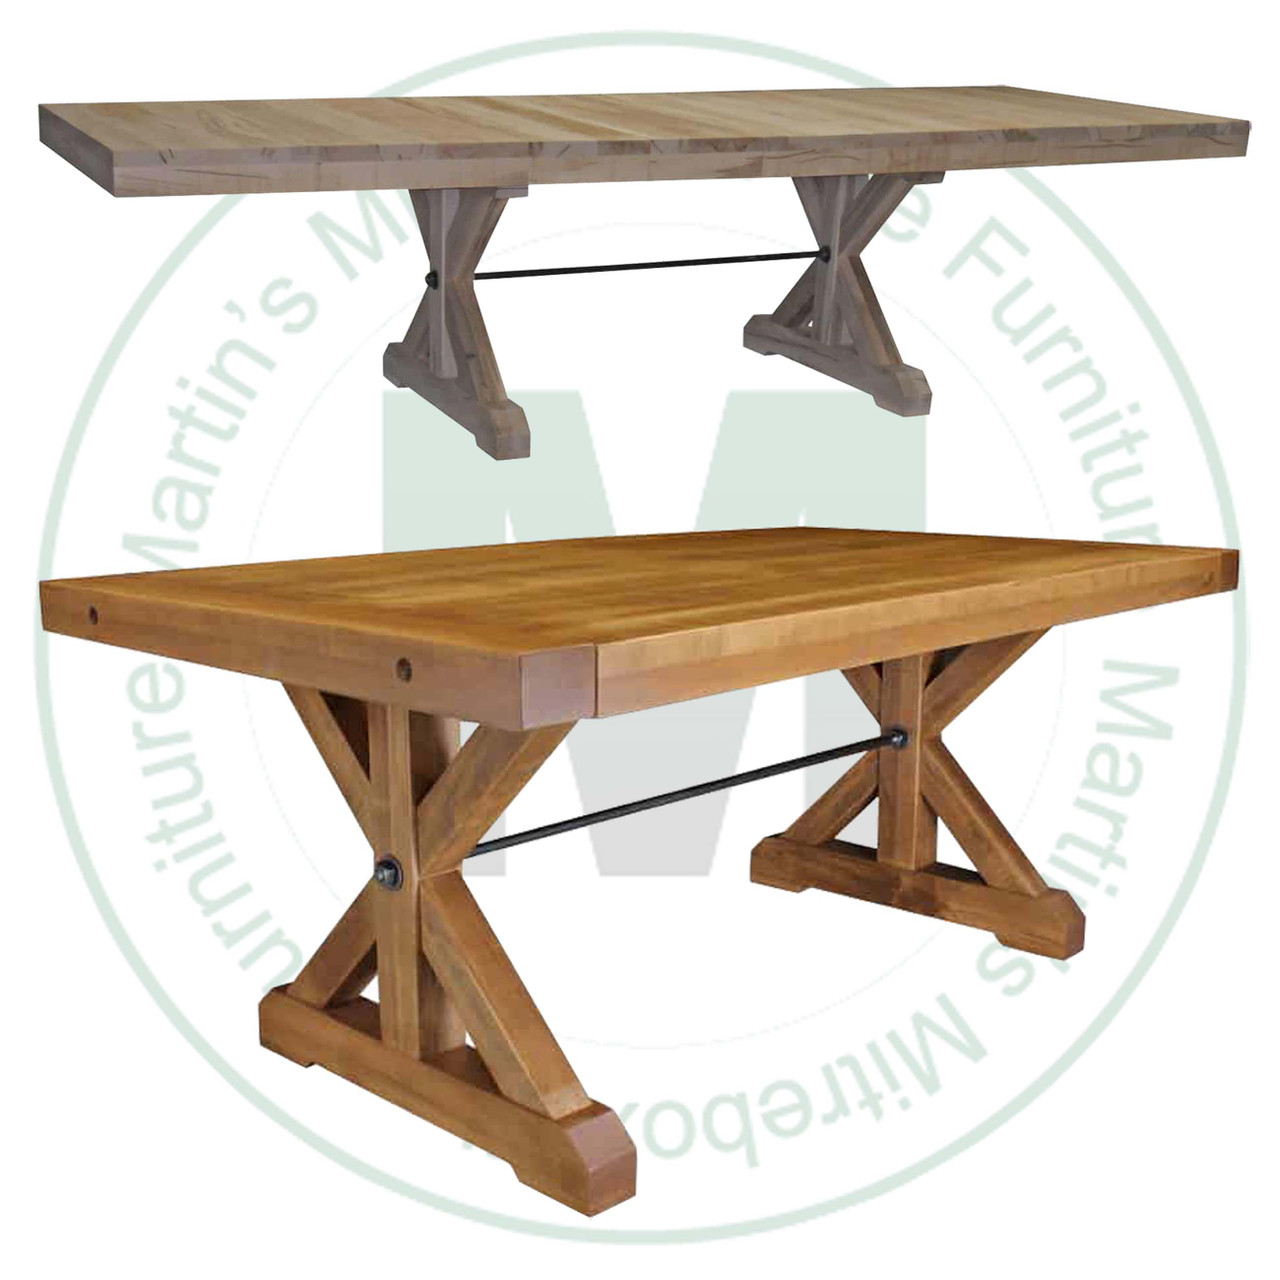 Maple Klondike Trestle Solid Top Table 36'' Deep x 60'' Wide x 30'' High With 2 - 12'' Leaves